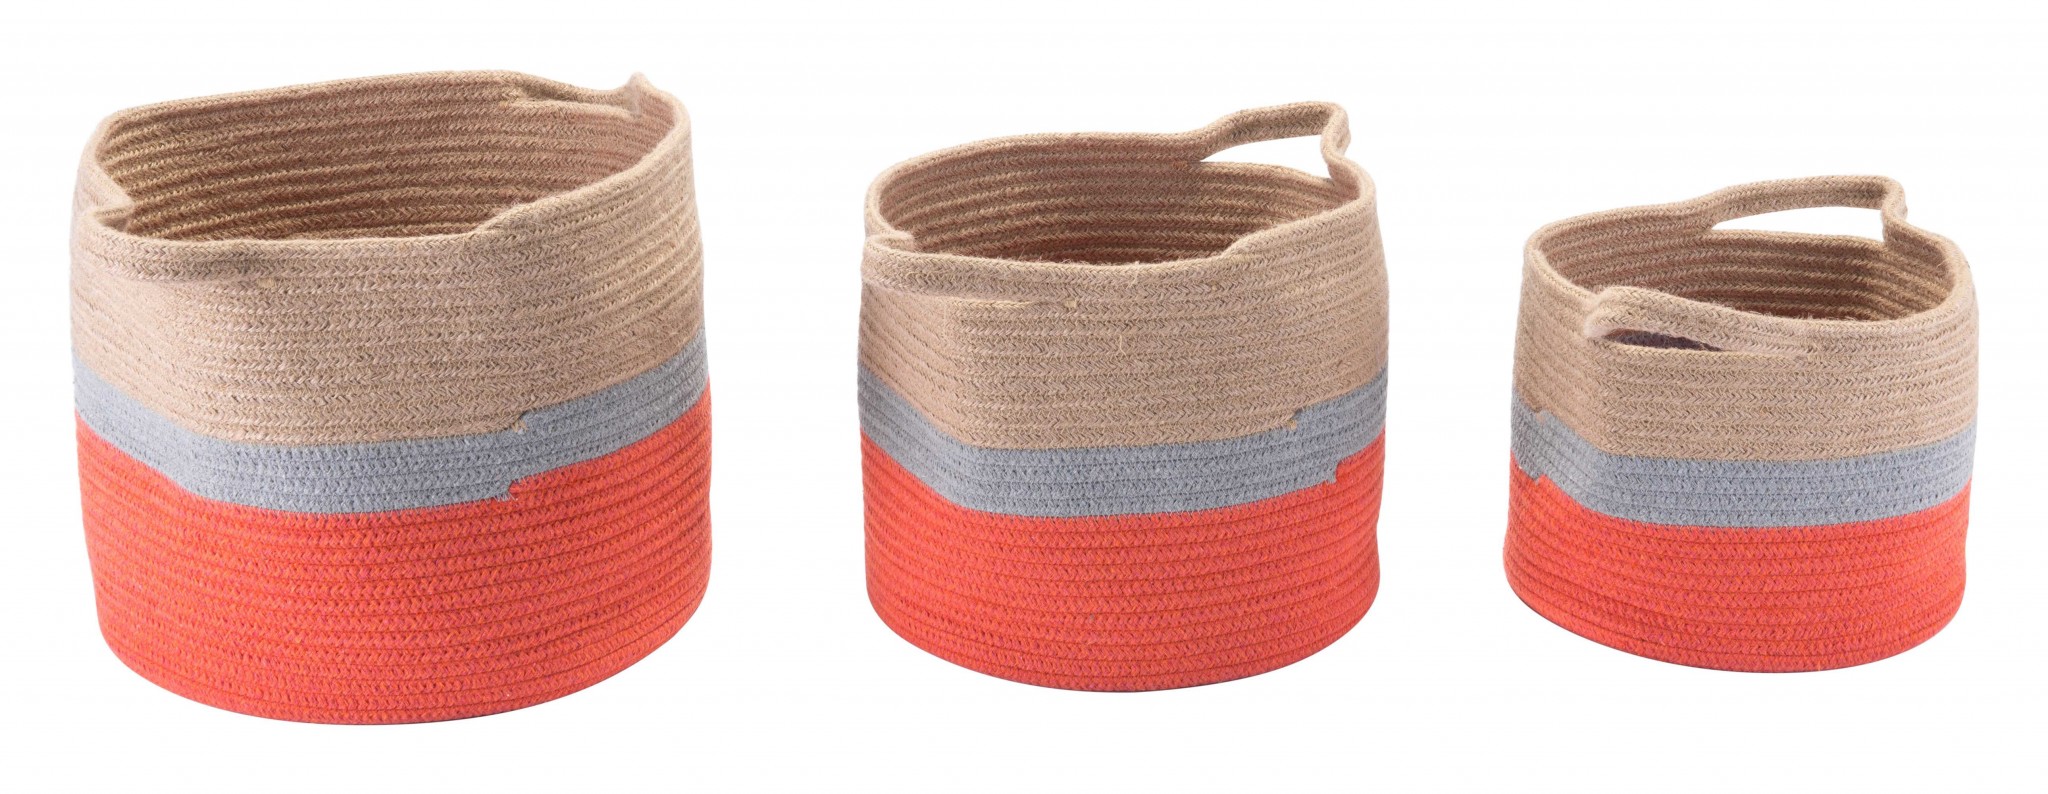 10.2" x 10.2" x 8.7" Multicolor, Jute, Baskets With Handles - Set of 3